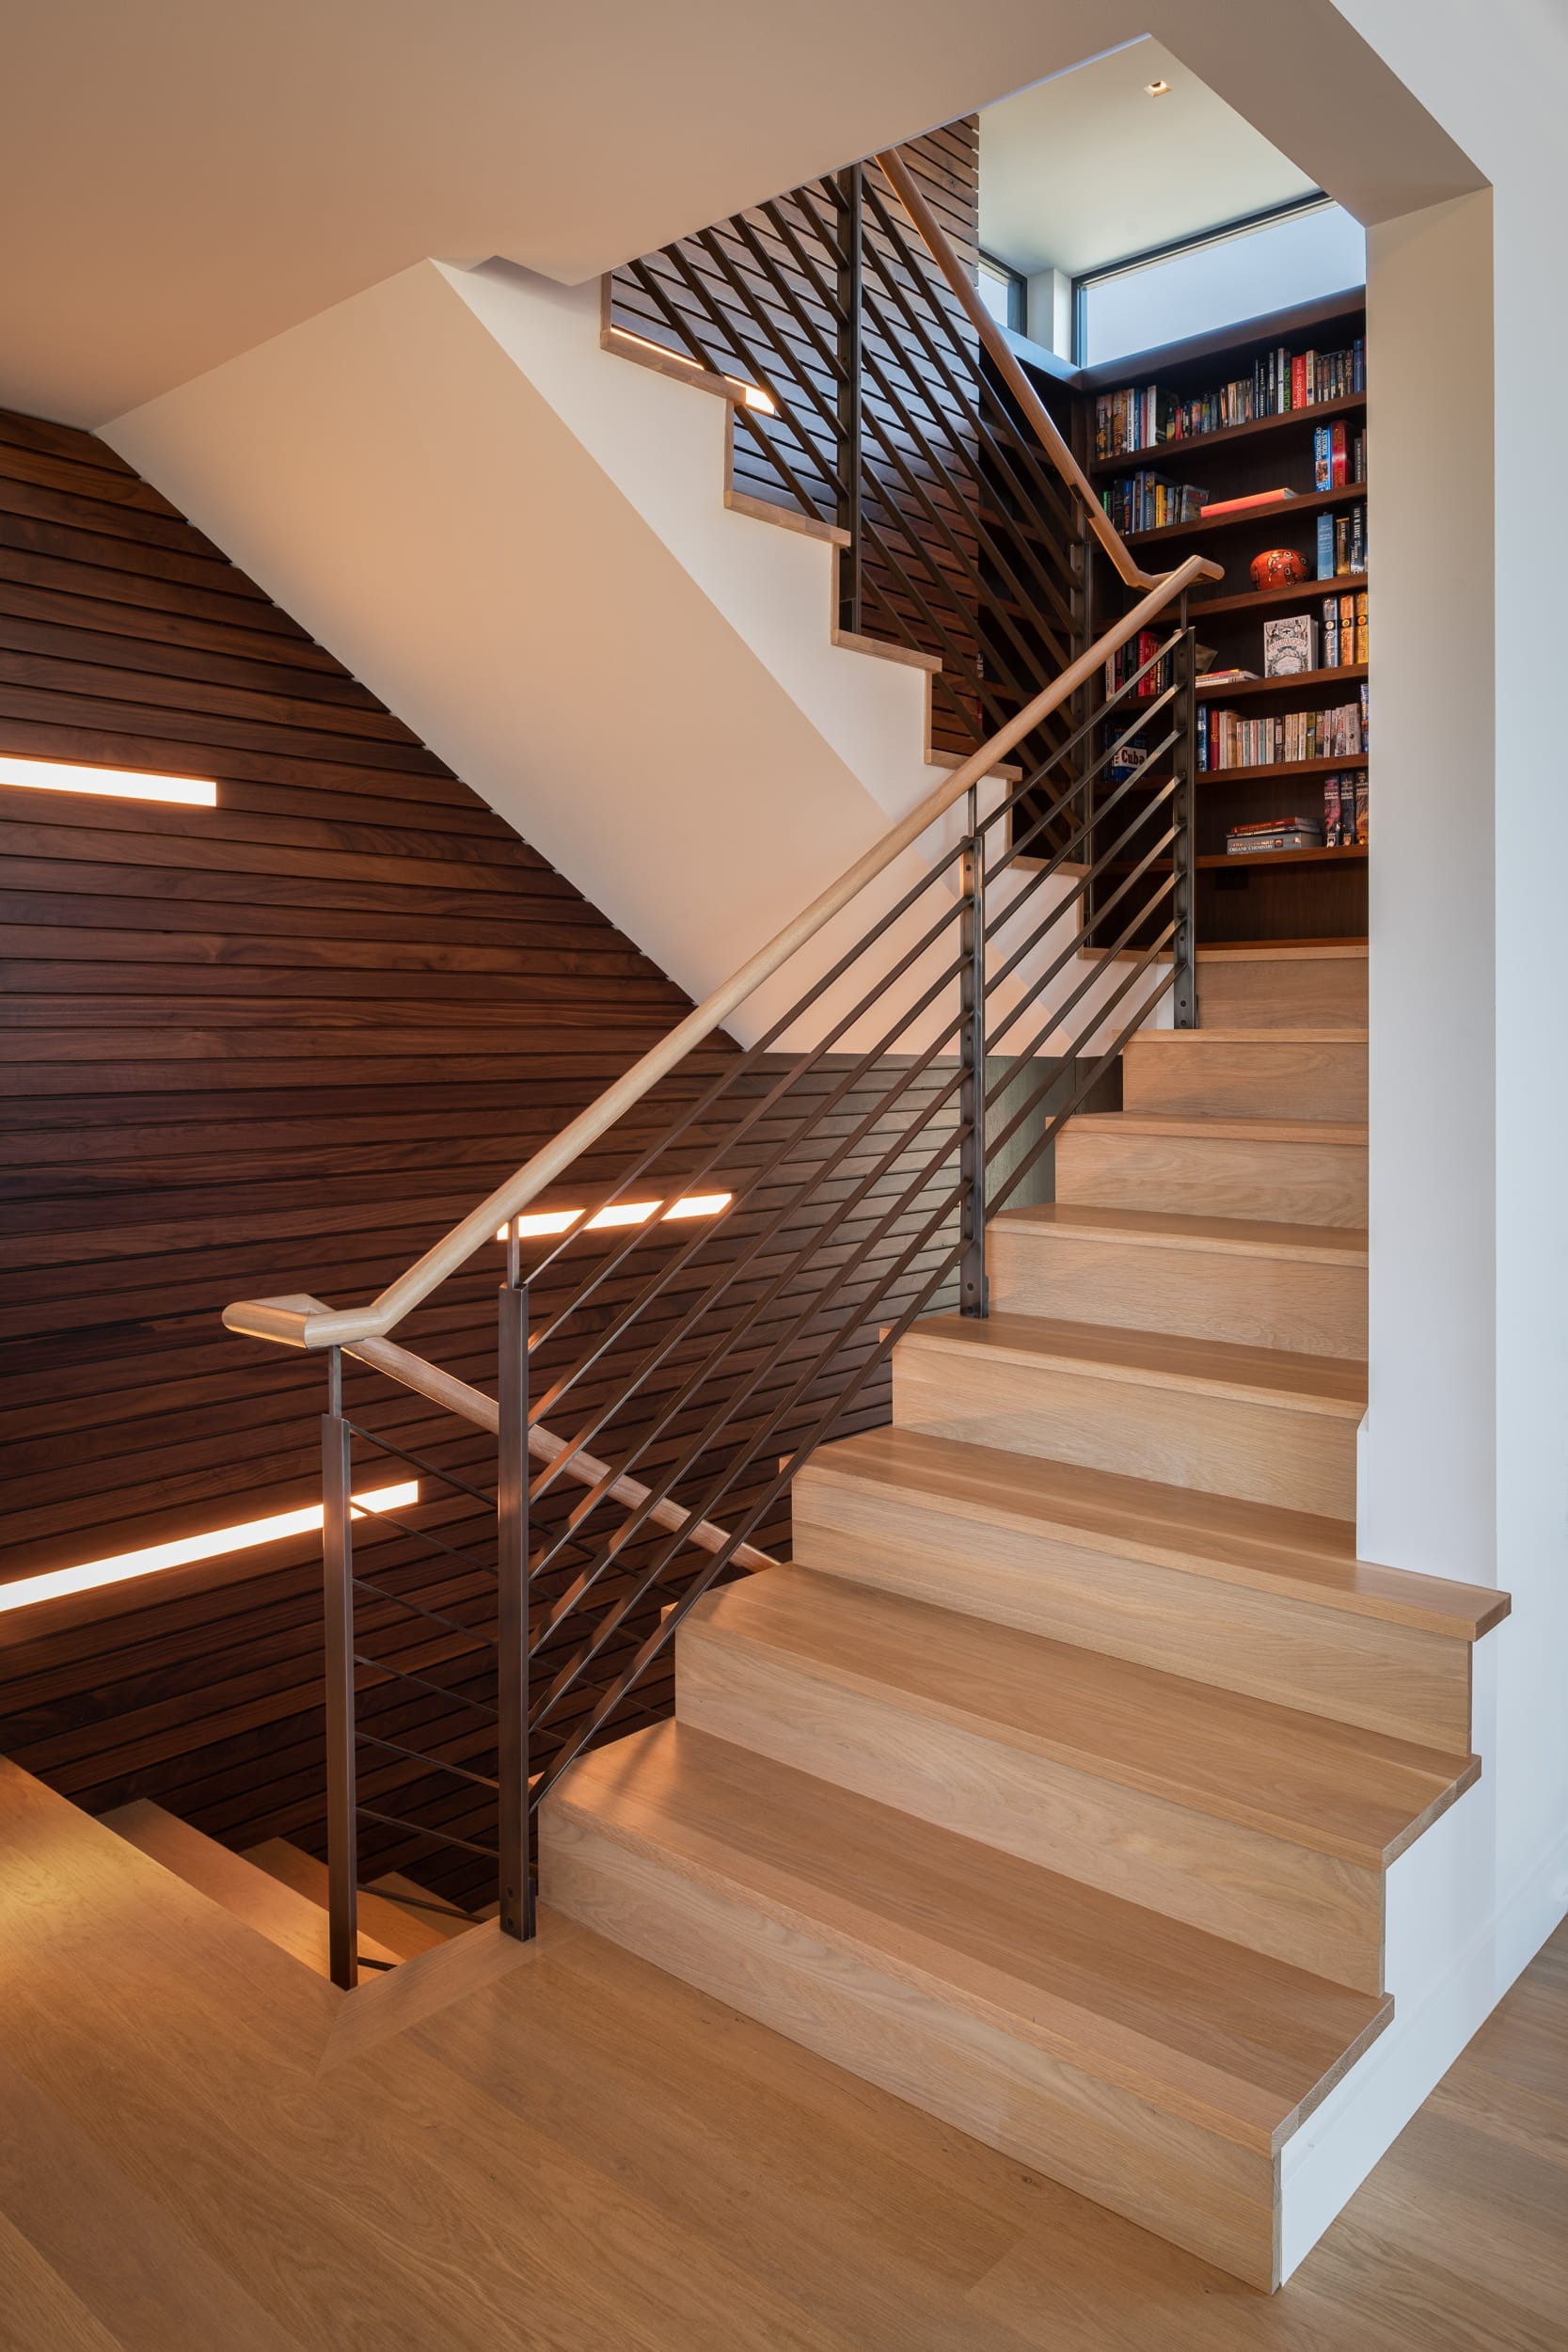 A modern staircase with wooden railings and bookshelves.